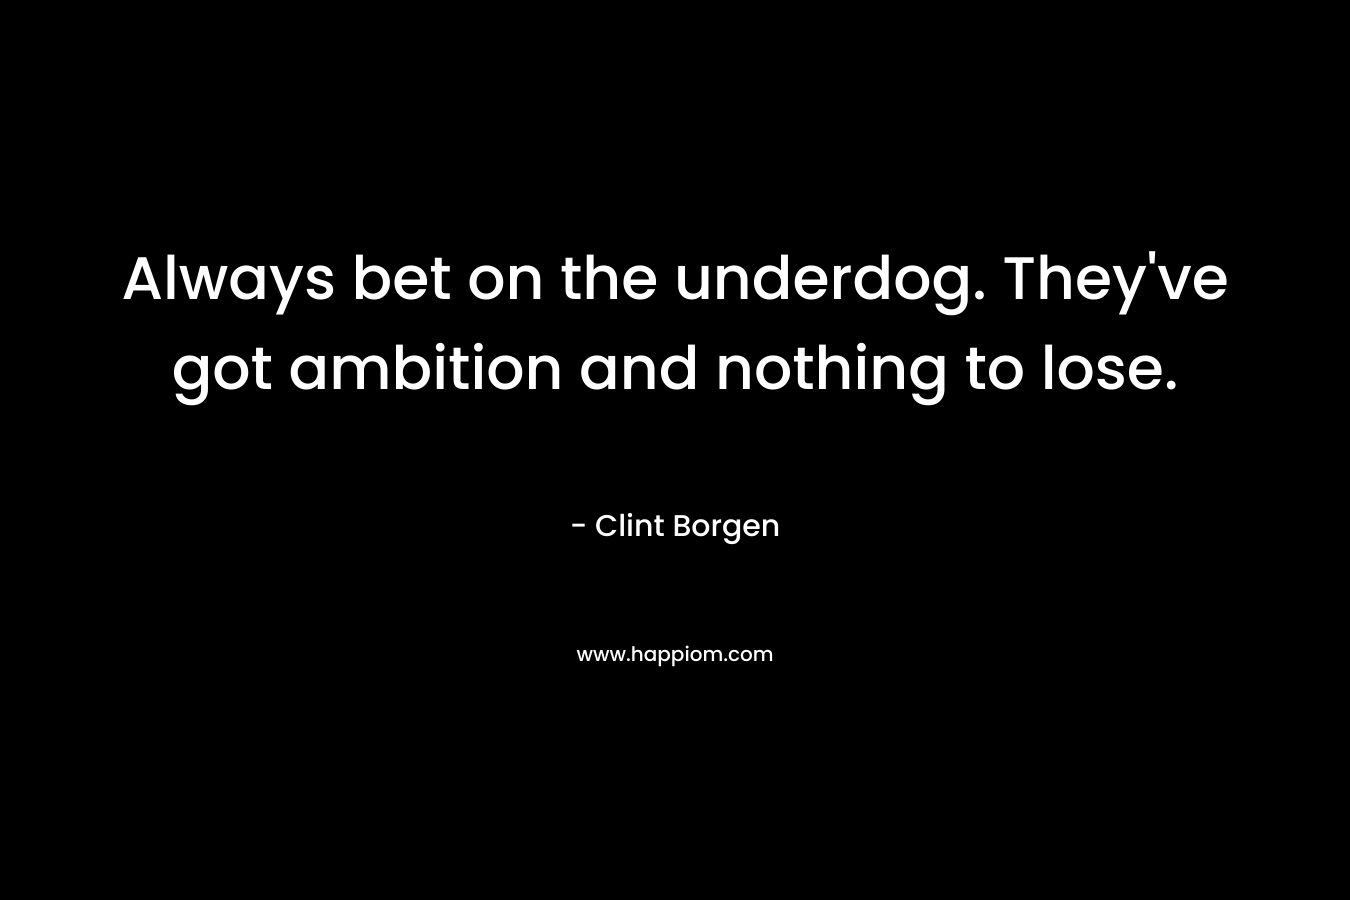 Always bet on the underdog. They’ve got ambition and nothing to lose. – Clint Borgen